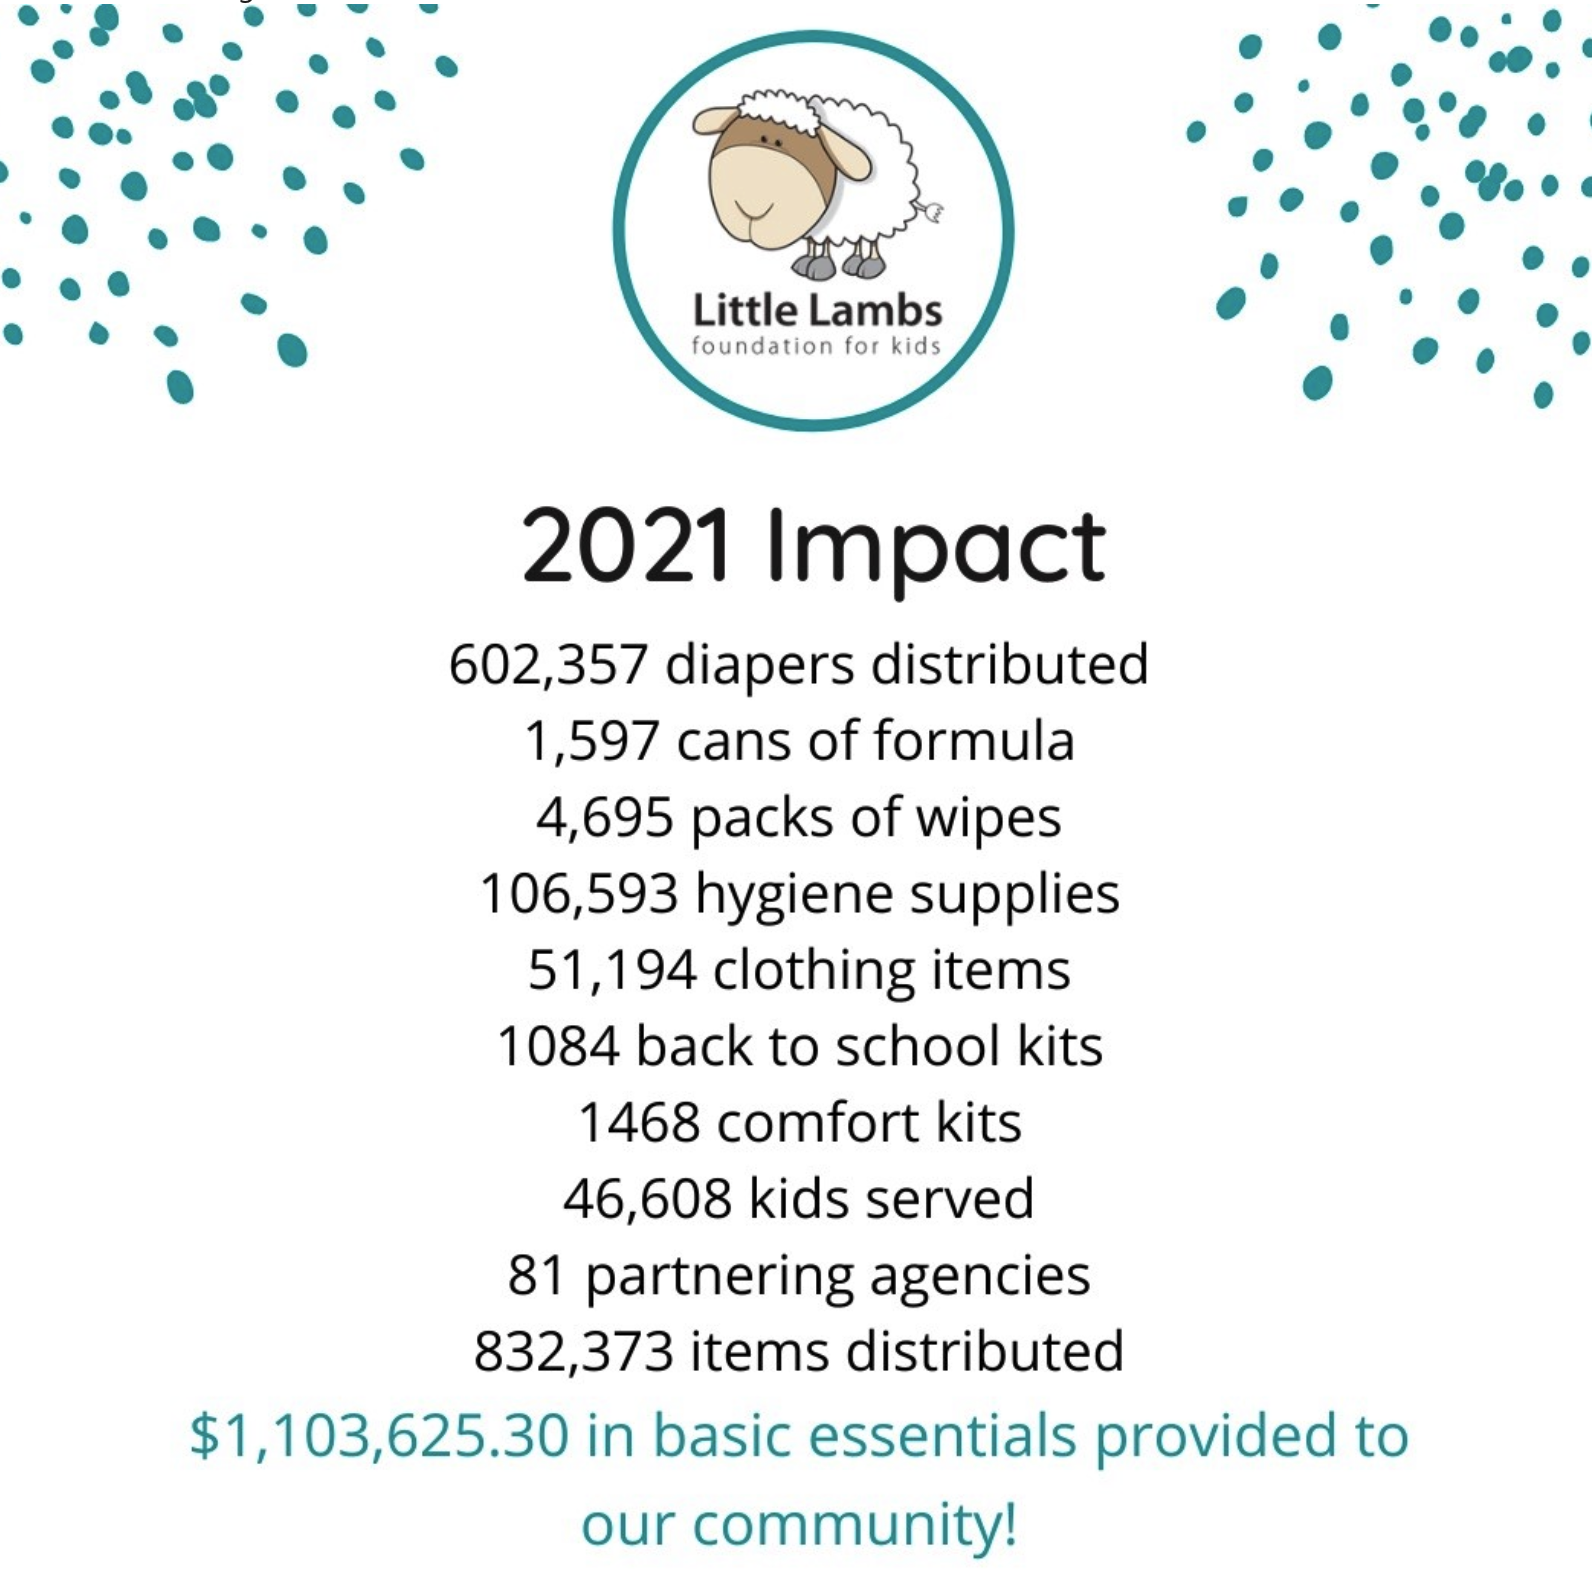 2021 impace: 602.357 diapers distributed, 1,597 cans of formula, 4,695 packs of wipes, 106,593 hygene supplies, 51,194 clothing items, 1084 back to school kits, 1468 comfort kits, 46,608 kids served, 81 partnering agencies, 832,373 items distributed. $1.1 million in basic essentials provided to our community!